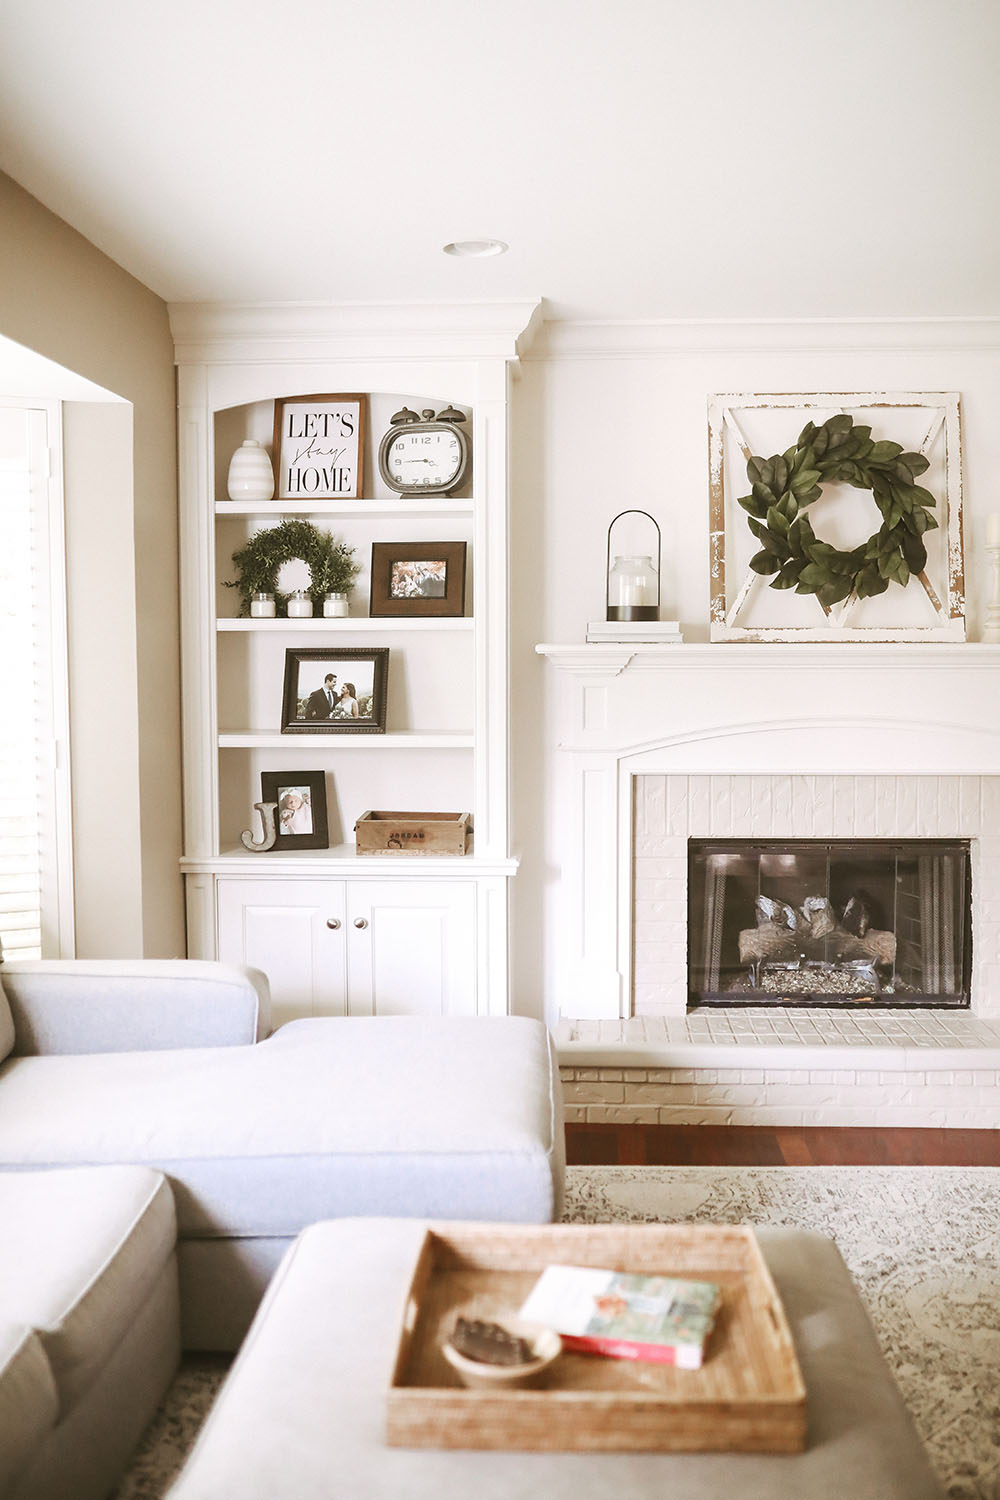 Neutral colored living room with white fireplace, mantle and built ins styled with frames, baskets, candles, and pops of greenery